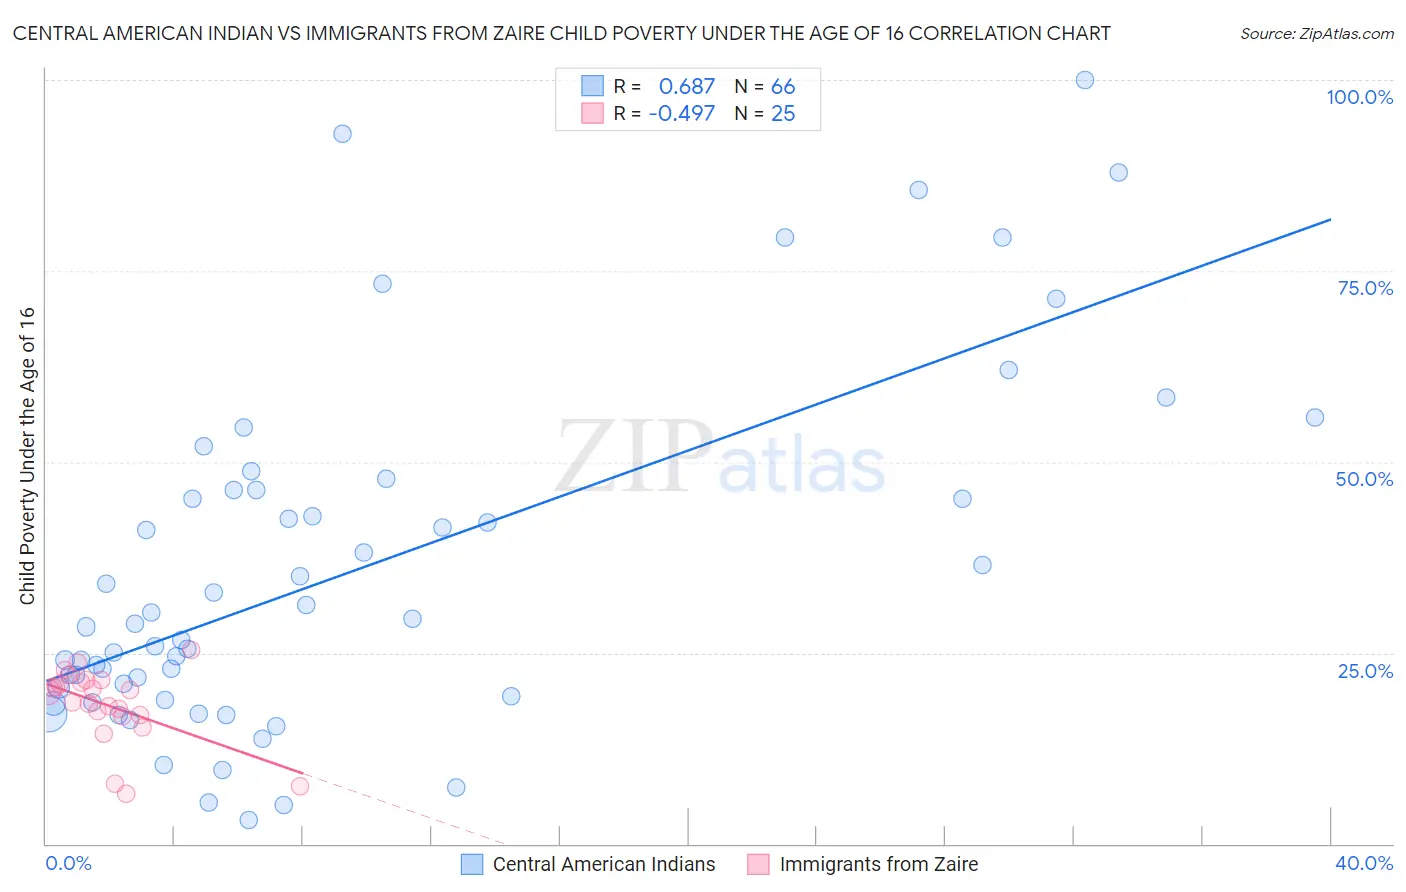 Central American Indian vs Immigrants from Zaire Child Poverty Under the Age of 16